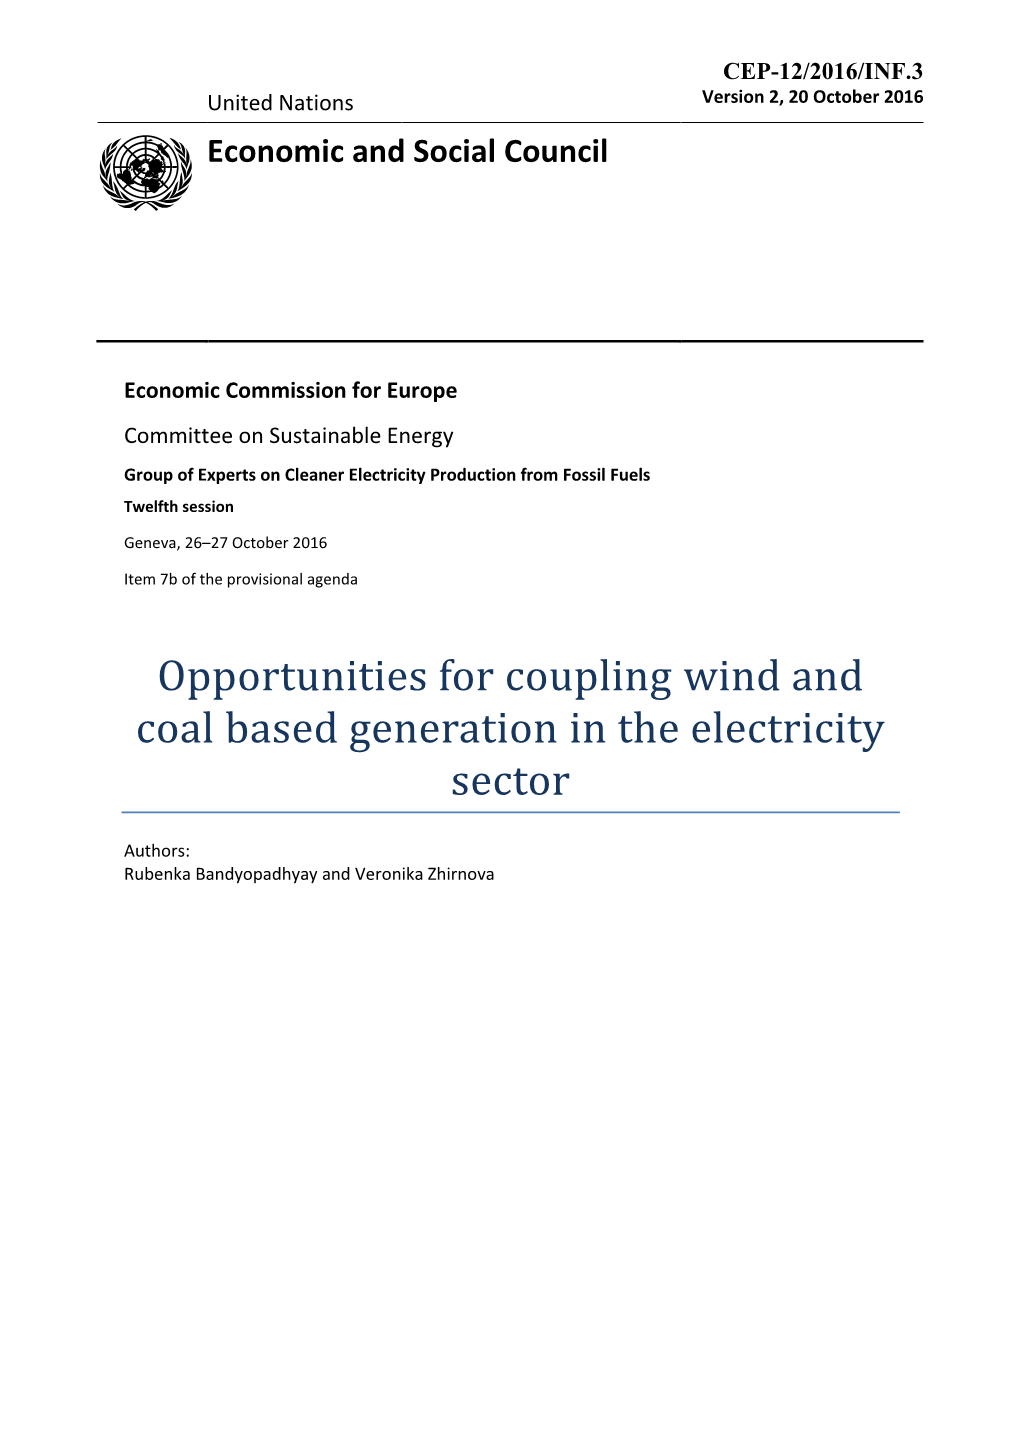 Opportunities for Coupling Wind and Coal Based Generation in the Electricity Sector